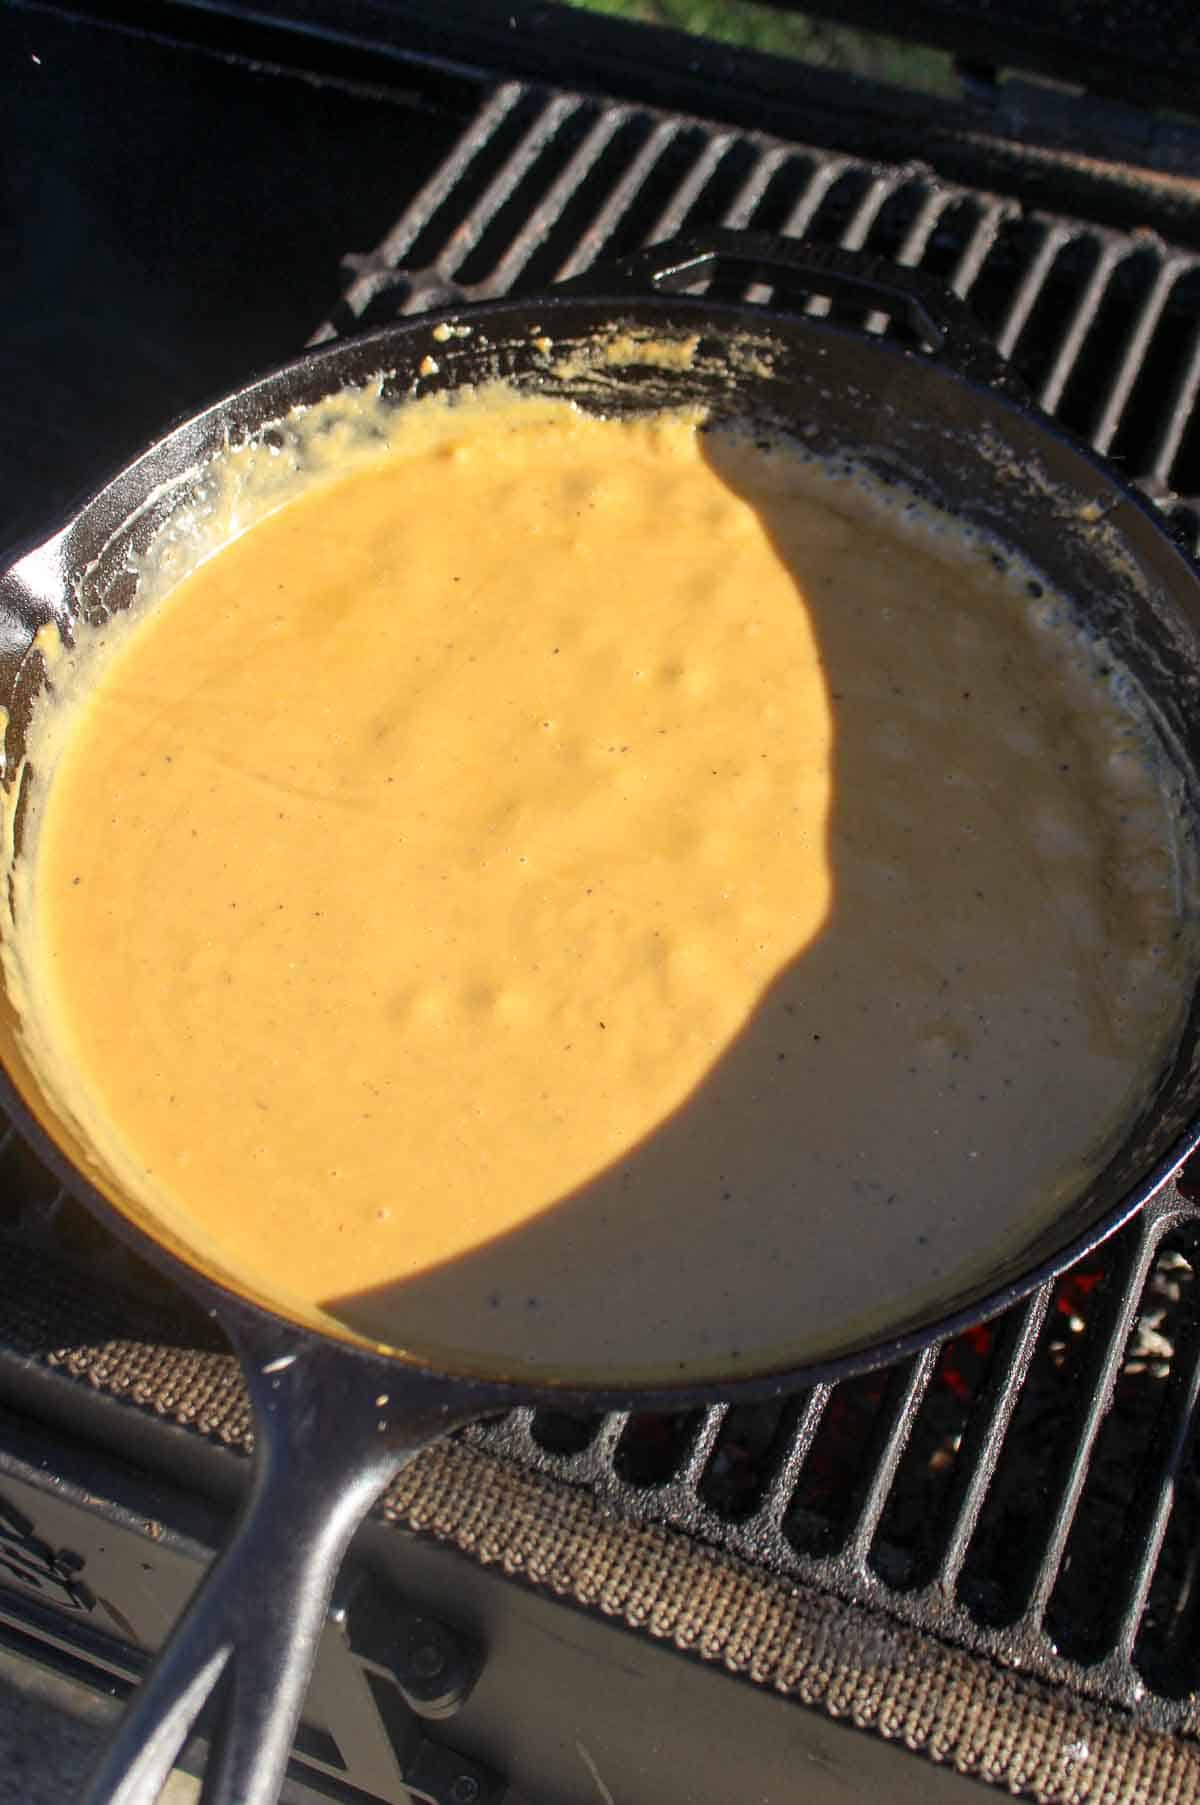 The finished cheese sauce bubbling over the fire.